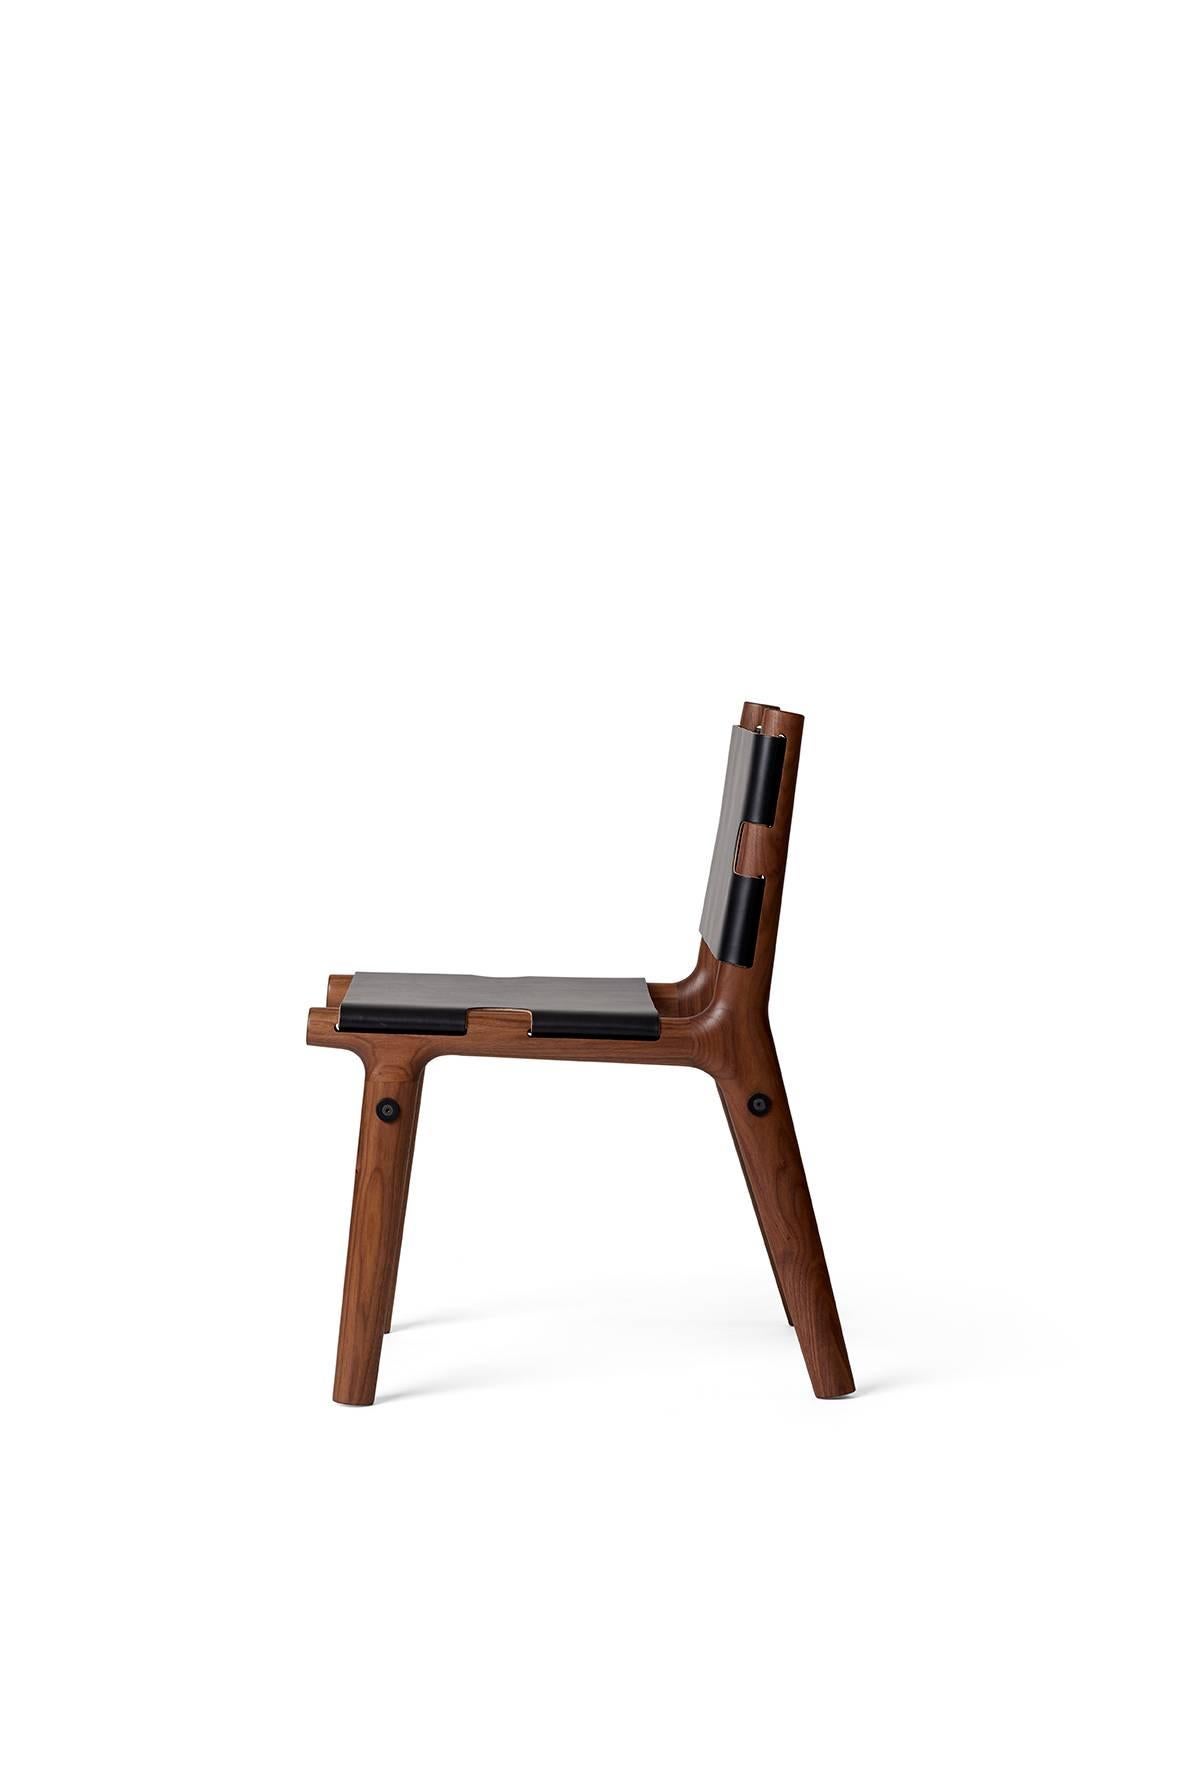 204 Side Chair, Modern Ash Hardwood, Tan Harness Leather, and Polished Aluminium For Sale 1